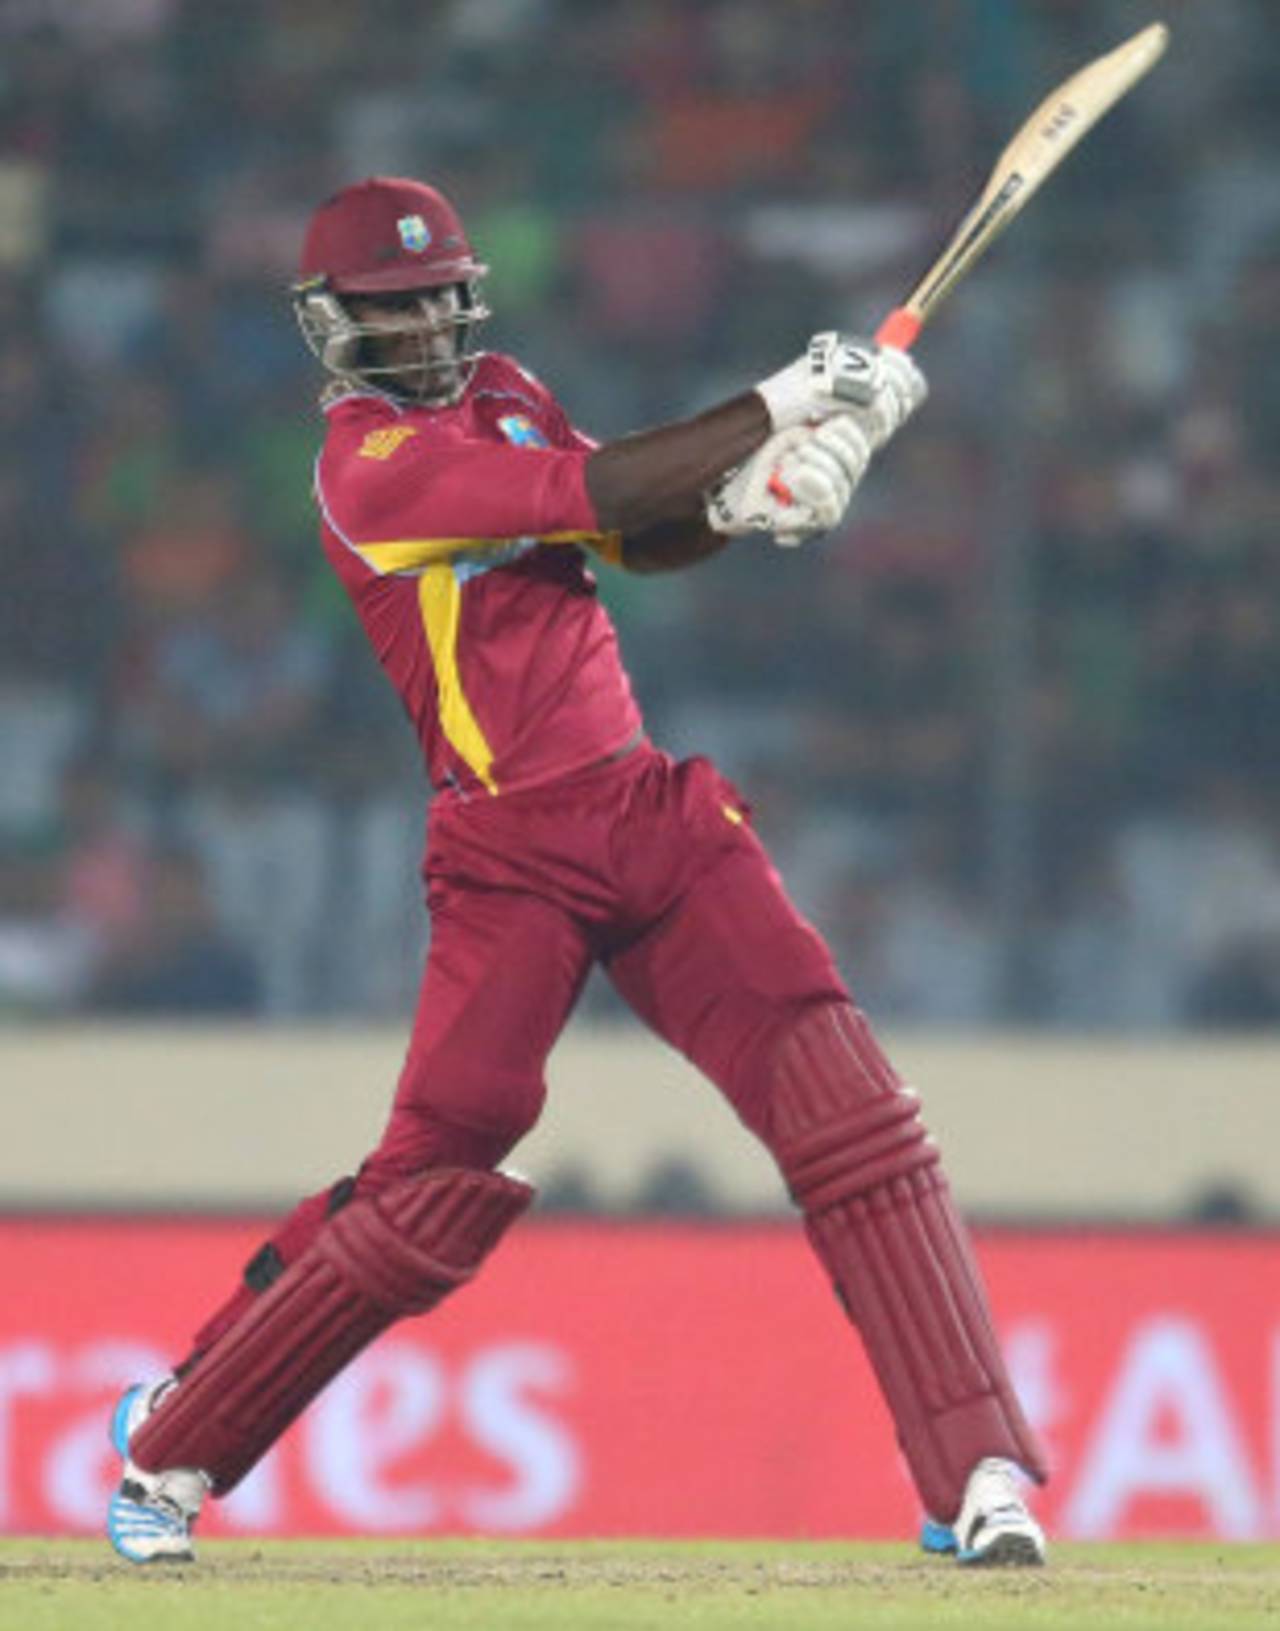 Darren Sammy finished the innings with an electric 42 off 20 balls, Pakistan v West Indies, World T20, Group 2, Mirpur, April 1, 2014